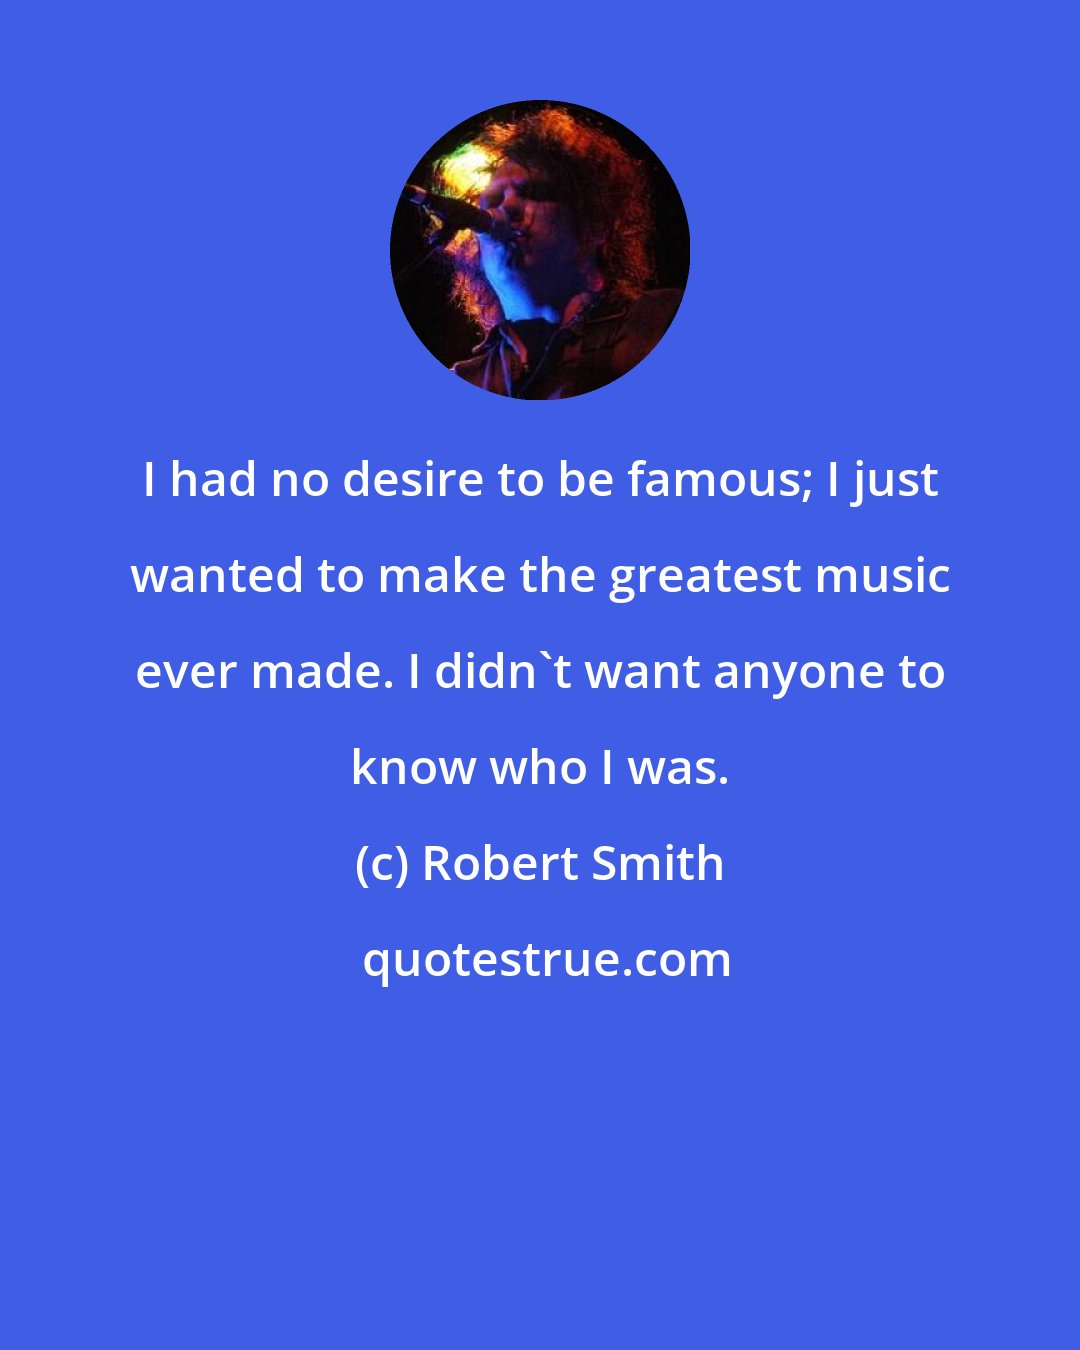 Robert Smith: I had no desire to be famous; I just wanted to make the greatest music ever made. I didn't want anyone to know who I was.